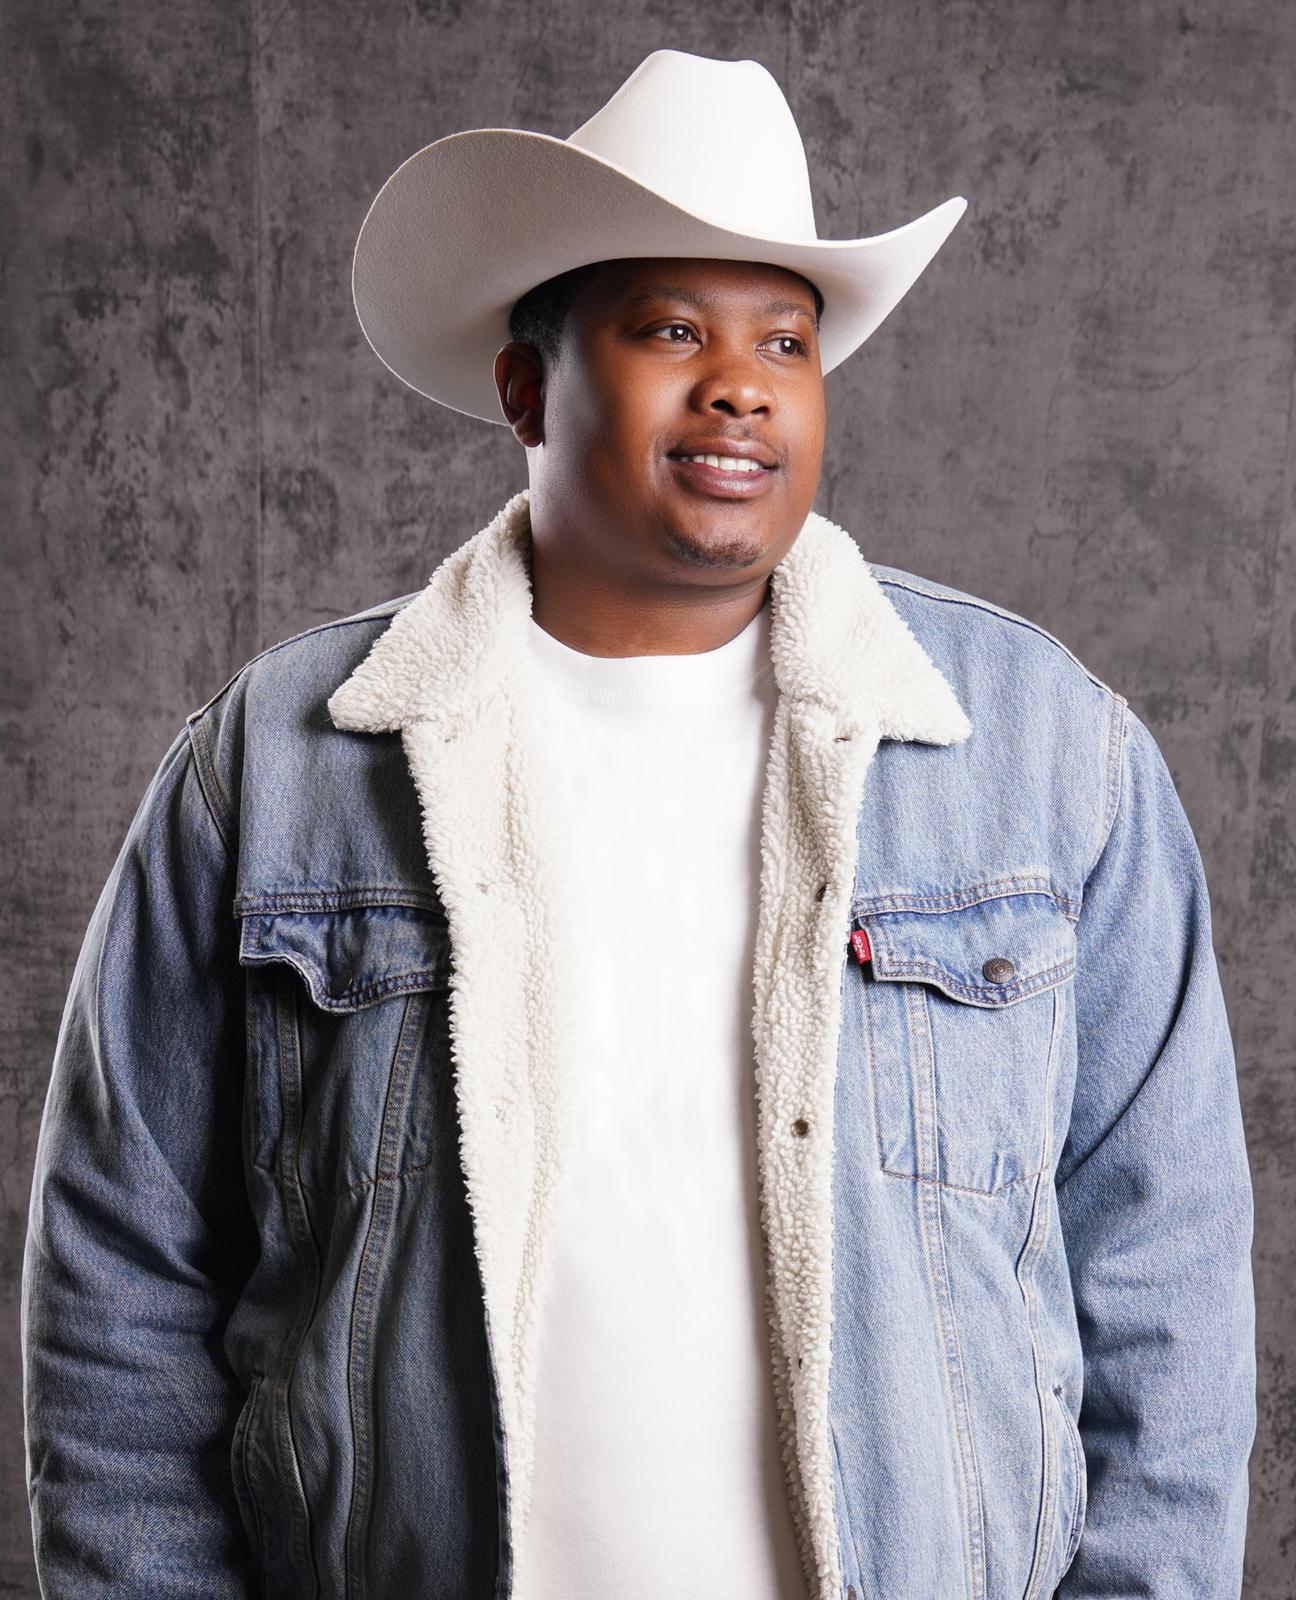 Rising Country Superstar Jarvis Redd Announces Official Invite to Perform at CMA Festival 2023